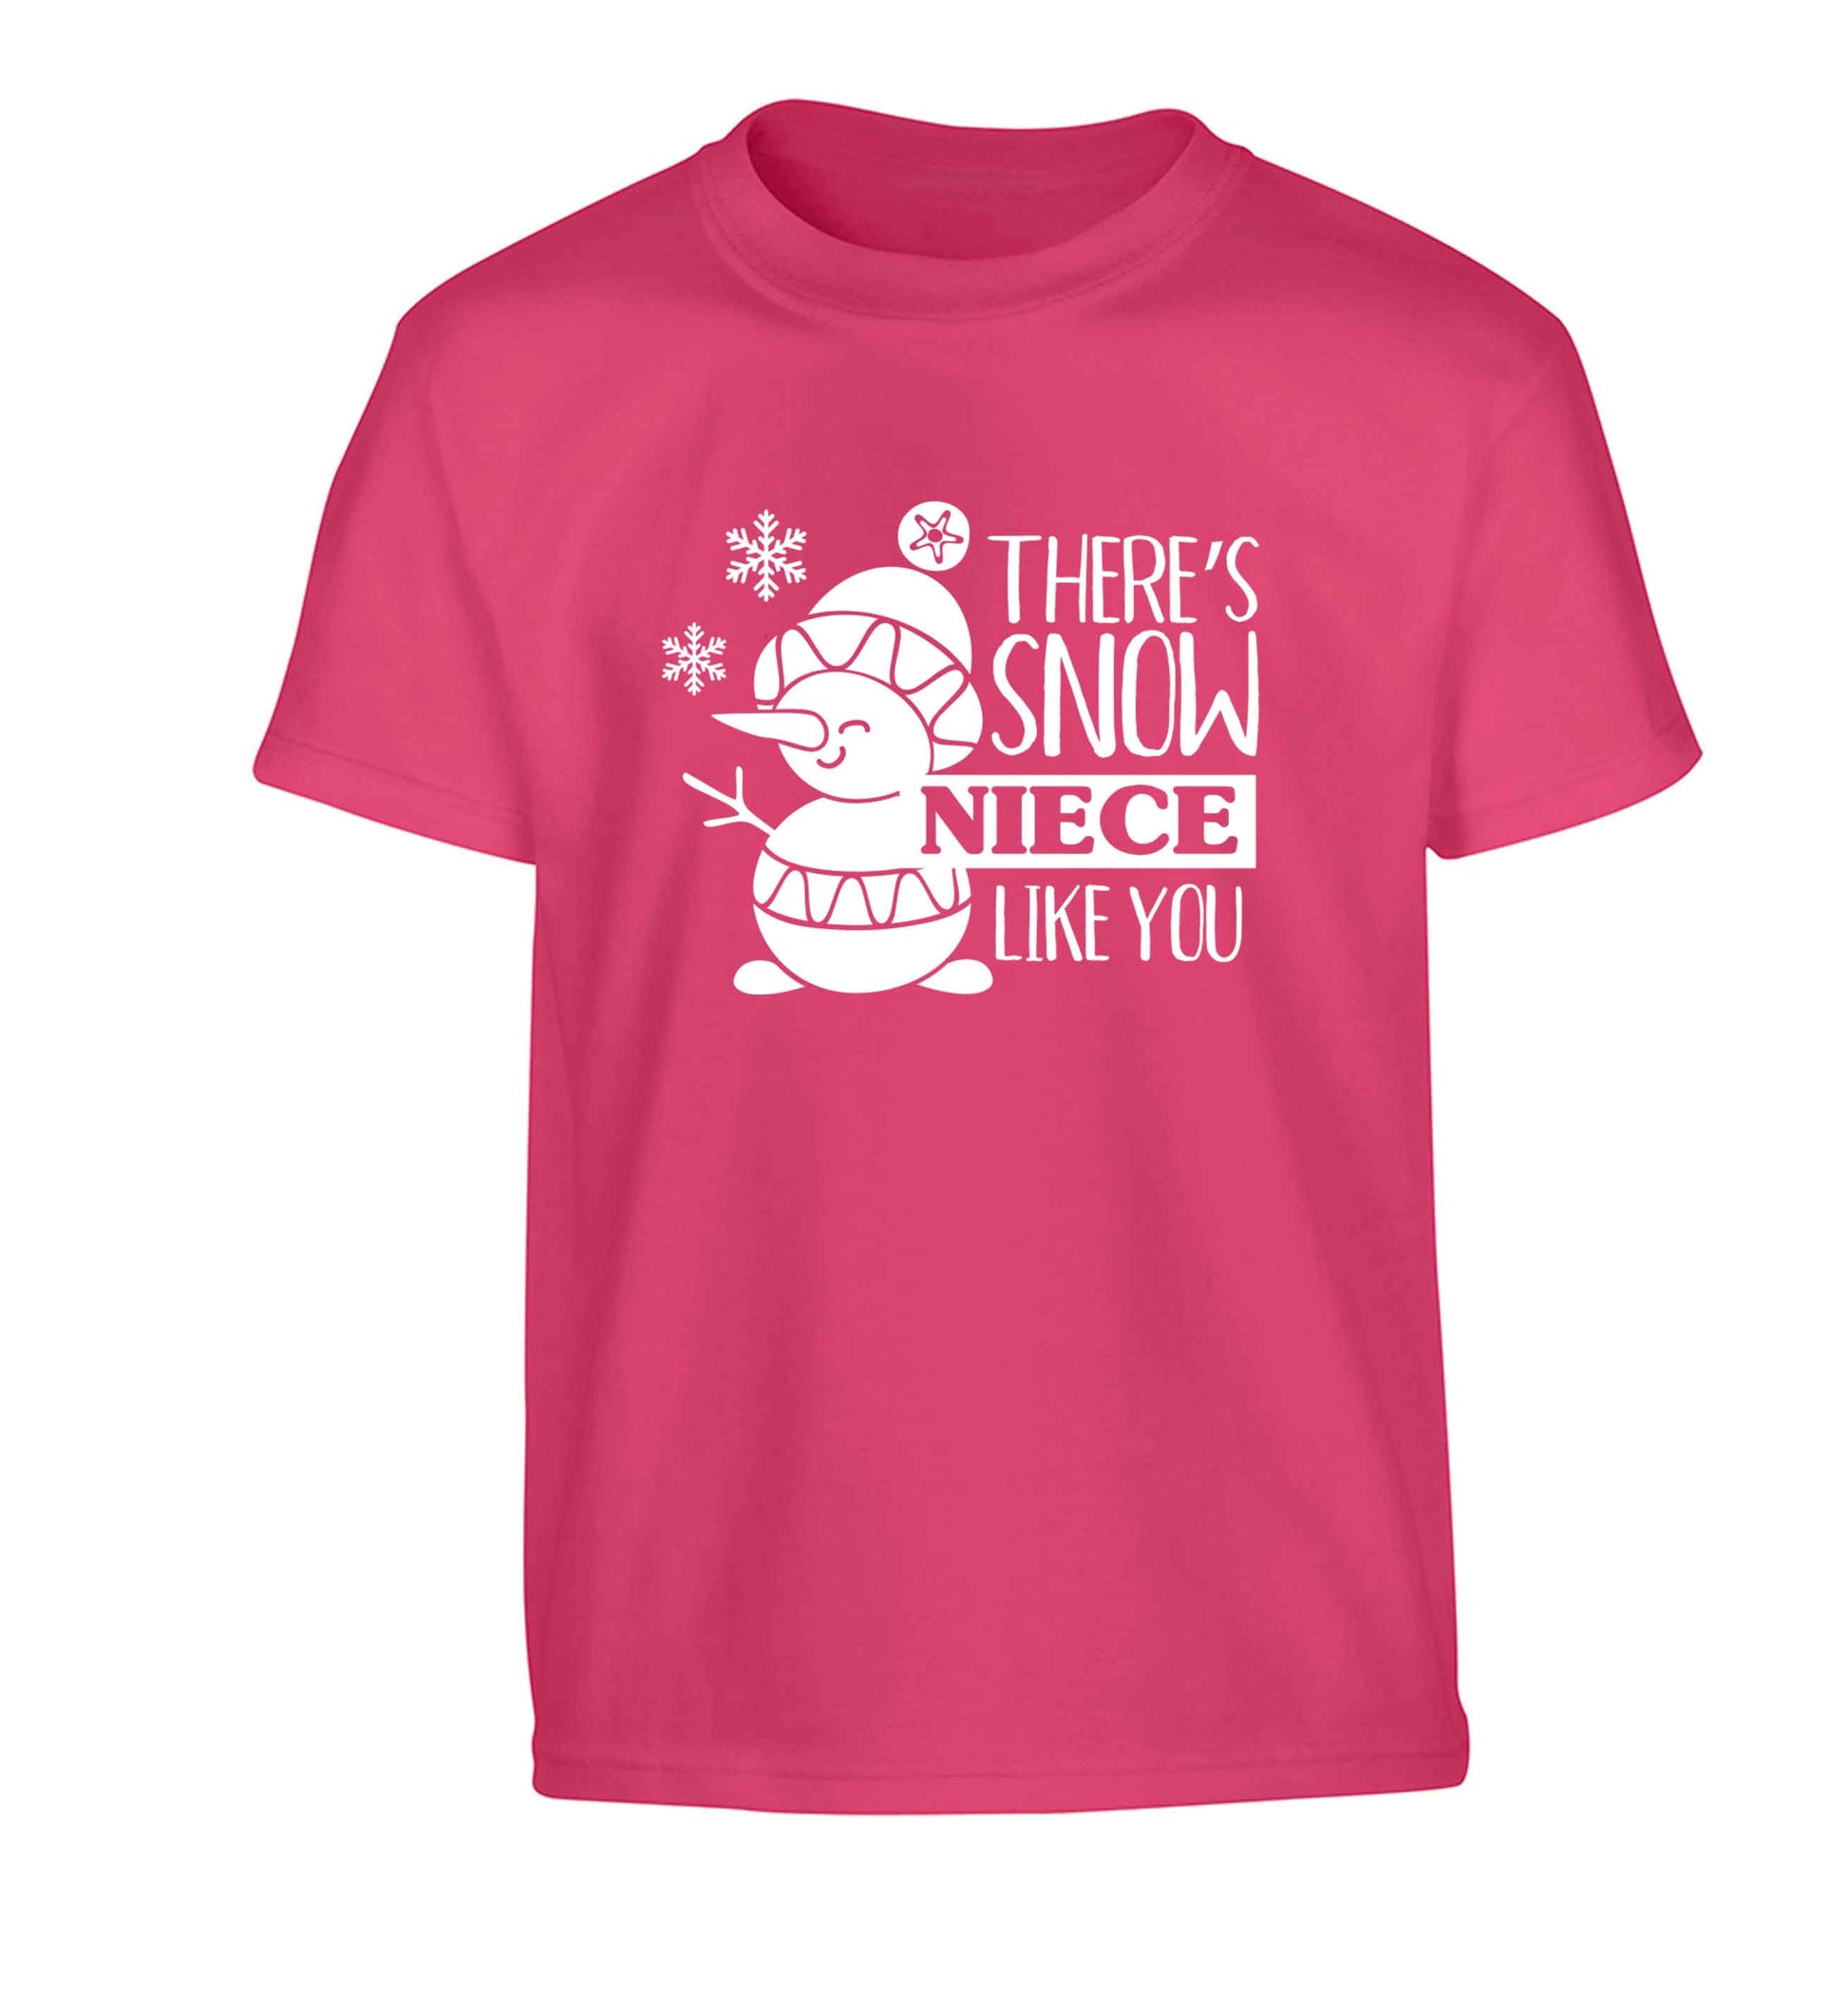 There's snow niece like you Children's pink Tshirt 12-13 Years